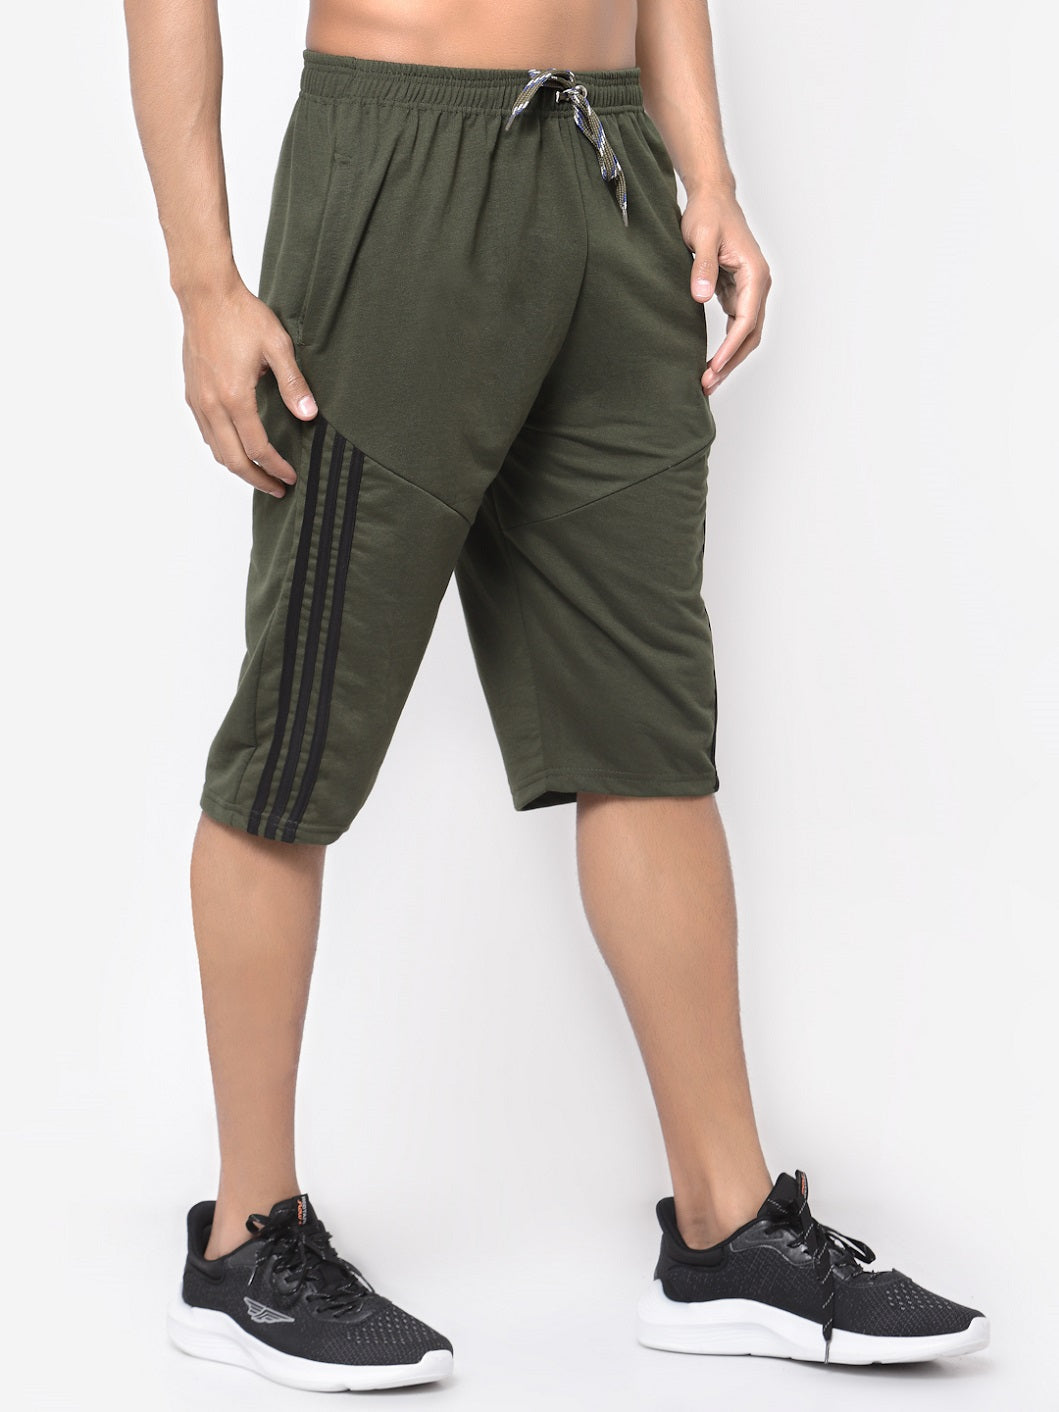 Top more than 236 three quarter length trousers